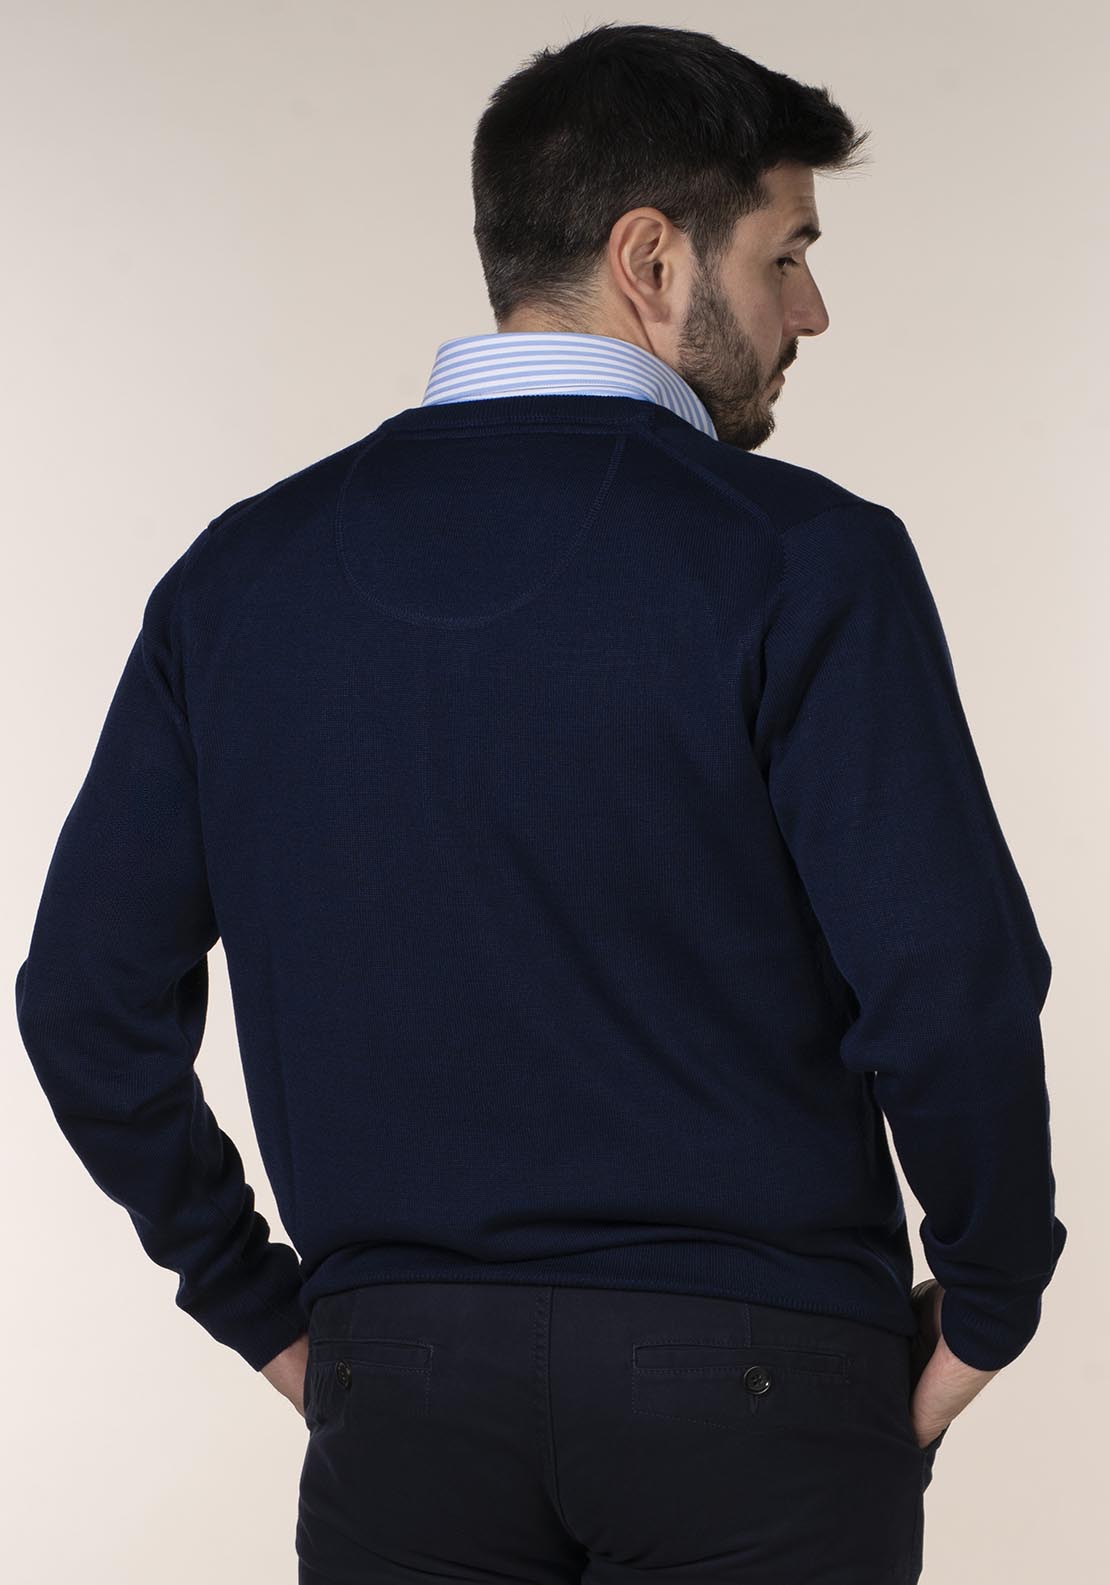 Yeats Mens 100% Cotton V-Neck Jumper 5 Shaws Department Stores